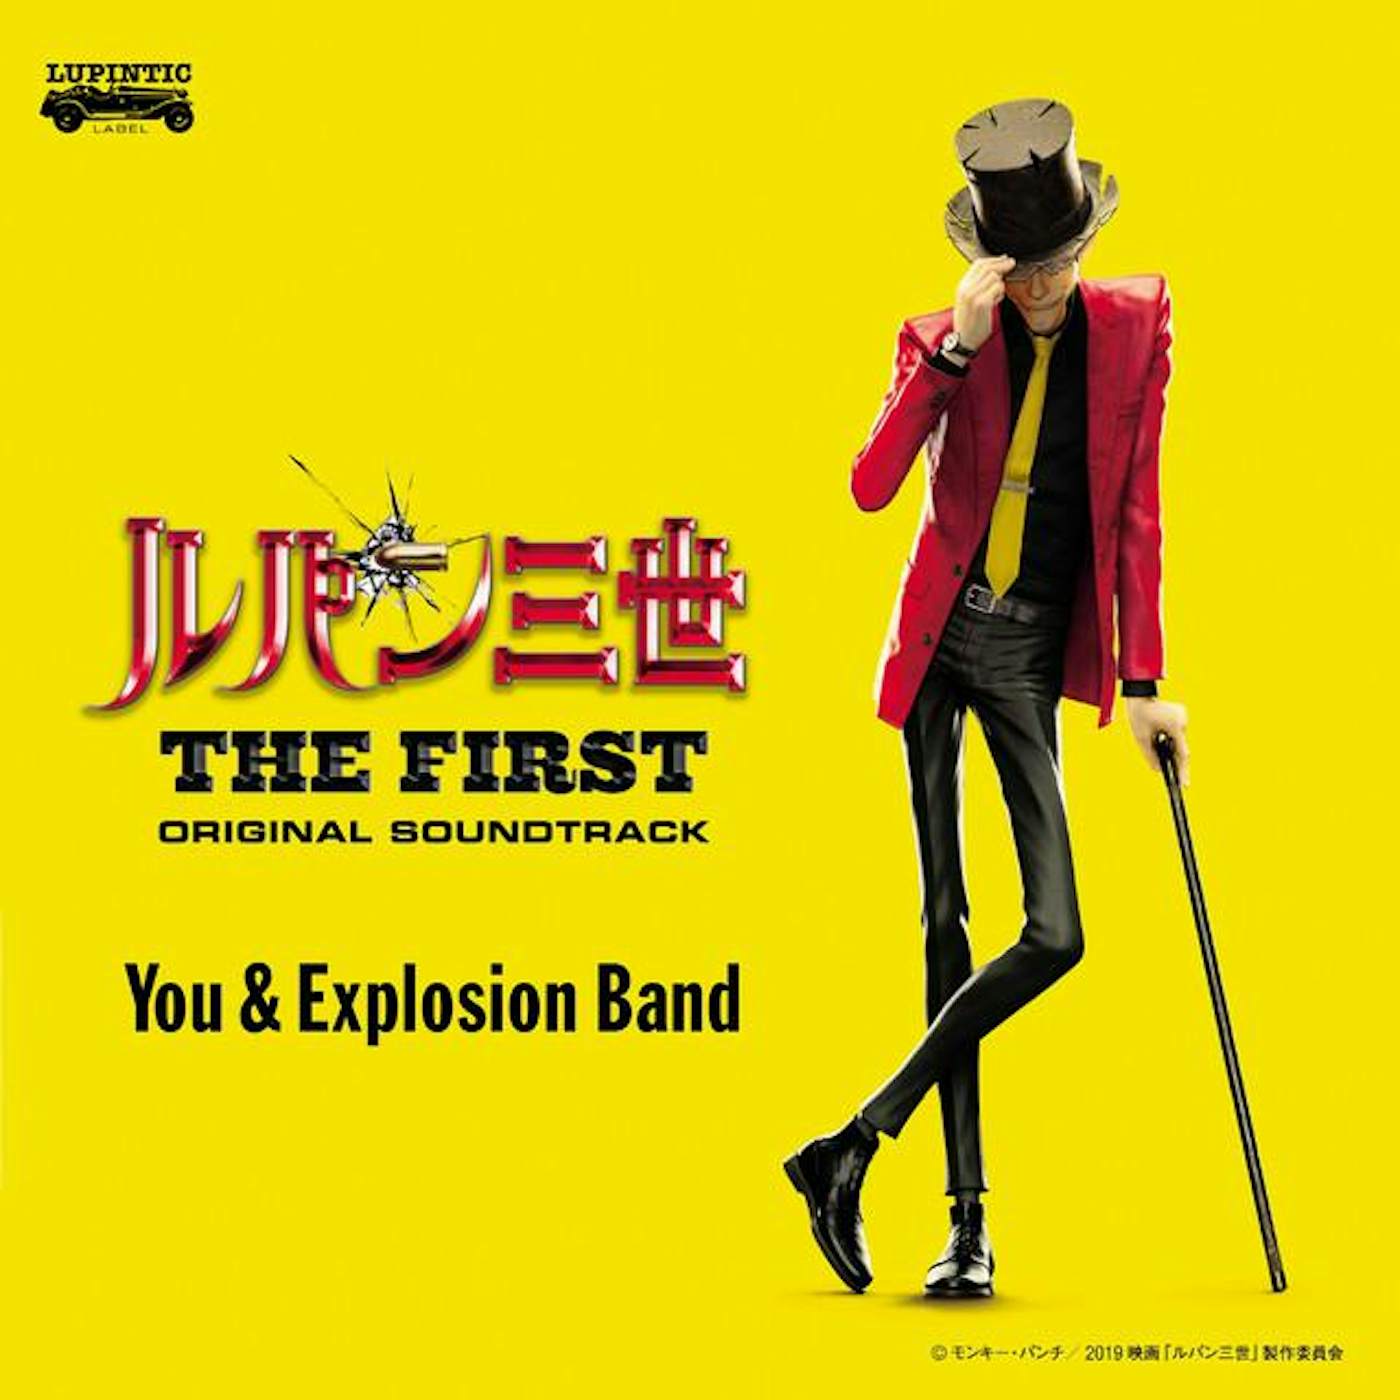 You & Explosion Band